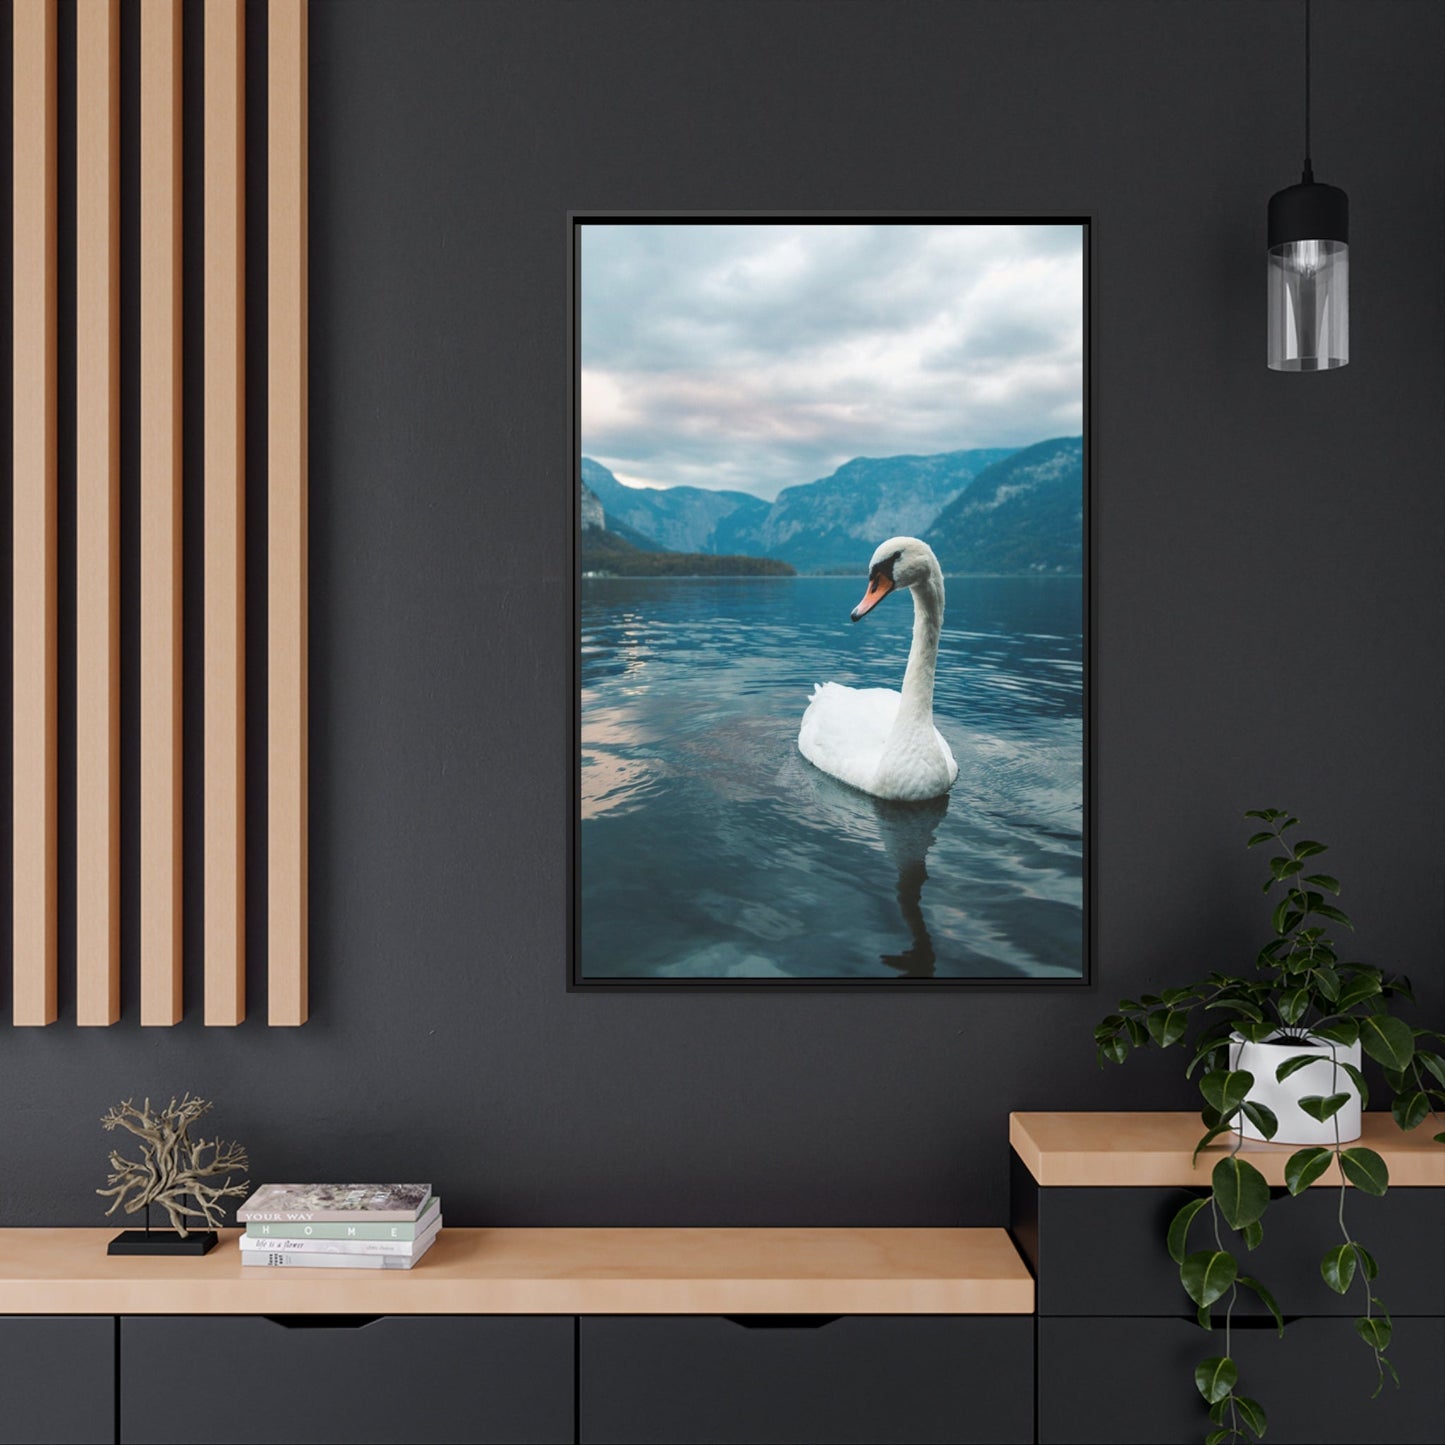 Elegance on the Water: Framed Poster and Print on Canvas Celebrating the Grace of Swan